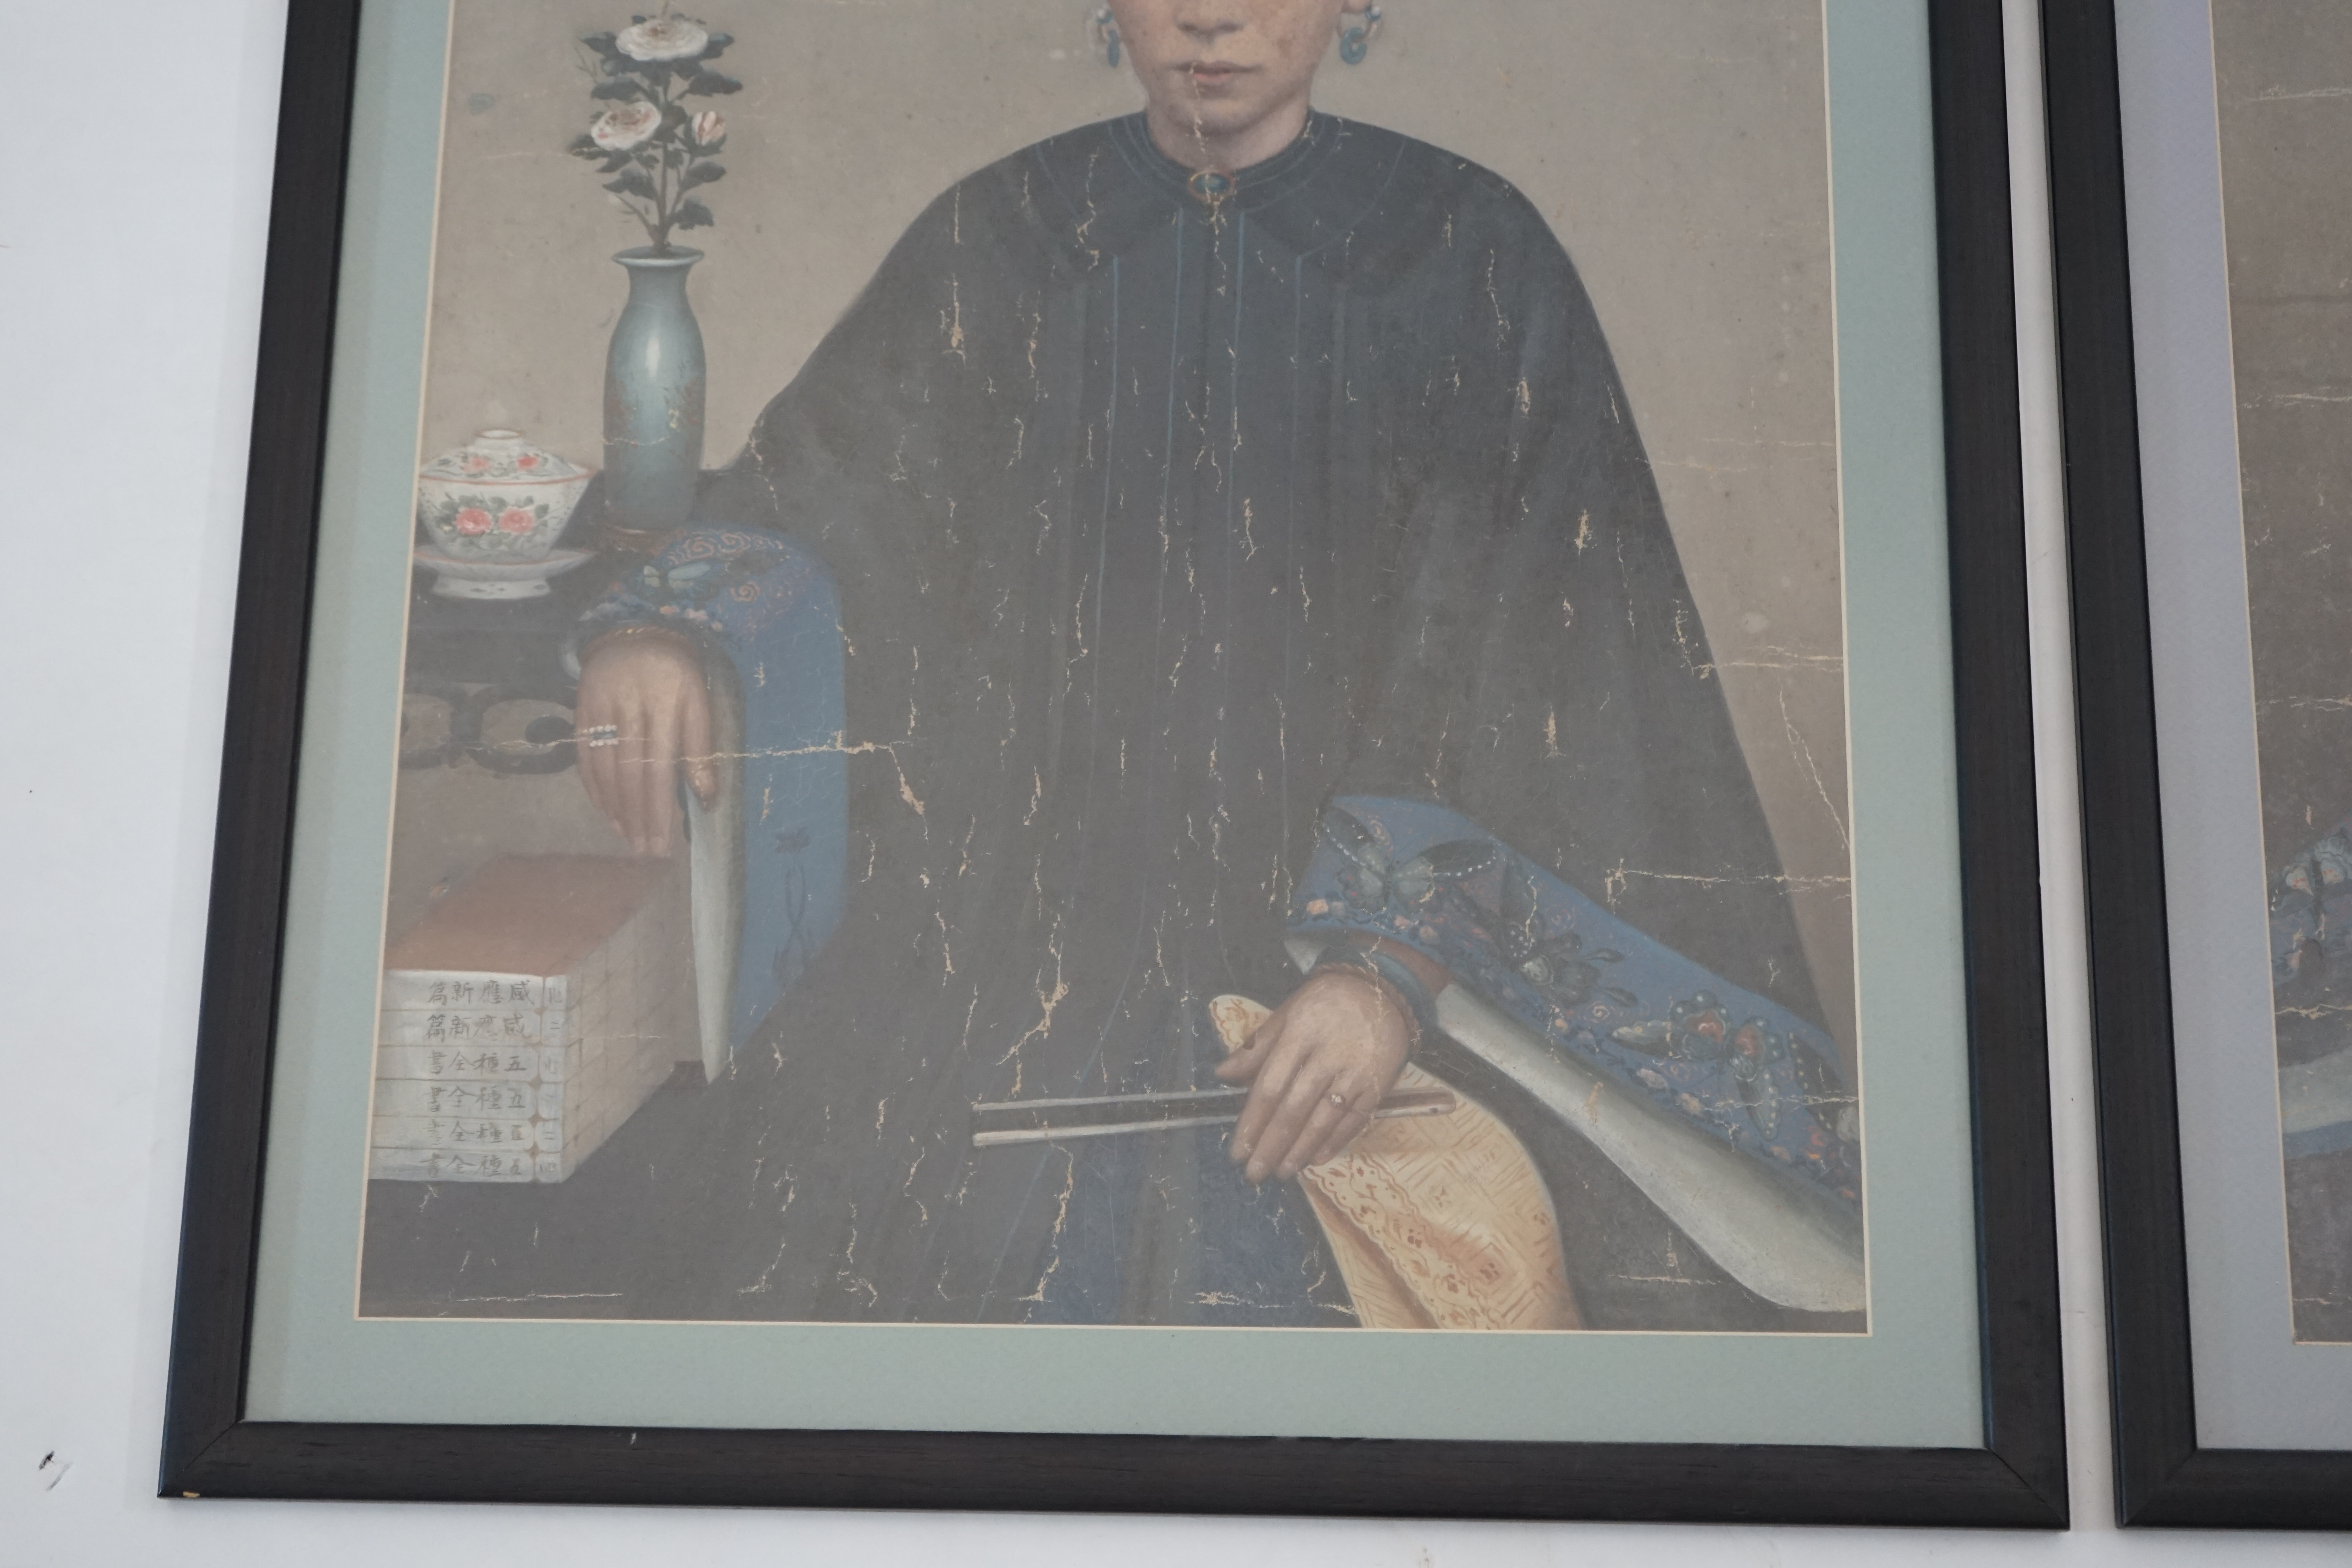 China Trade, late Qing dynasty, two portraits of Qing ladies, oil on canvas, each 63 x 47cm, later framed and glazed. Condition - poor to fair